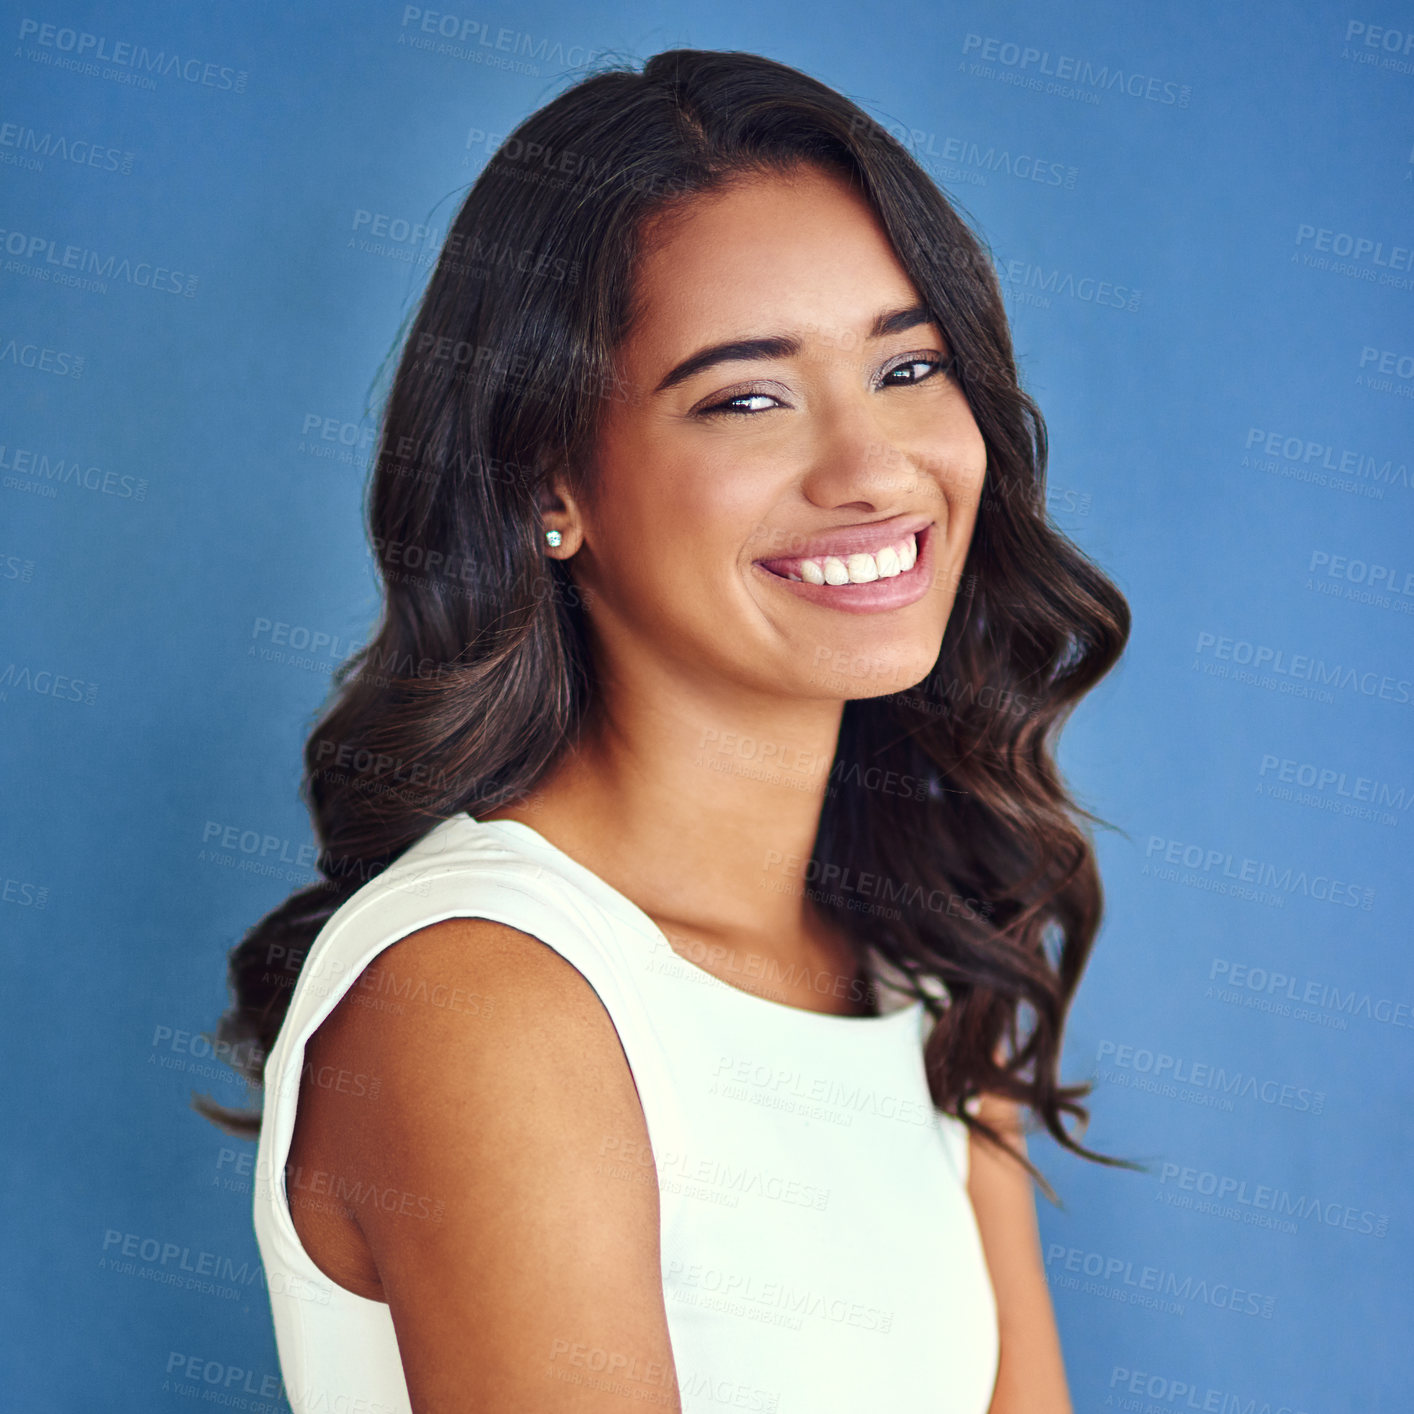 Buy stock photo Studio portrait of a confident young woman posing against a blue background